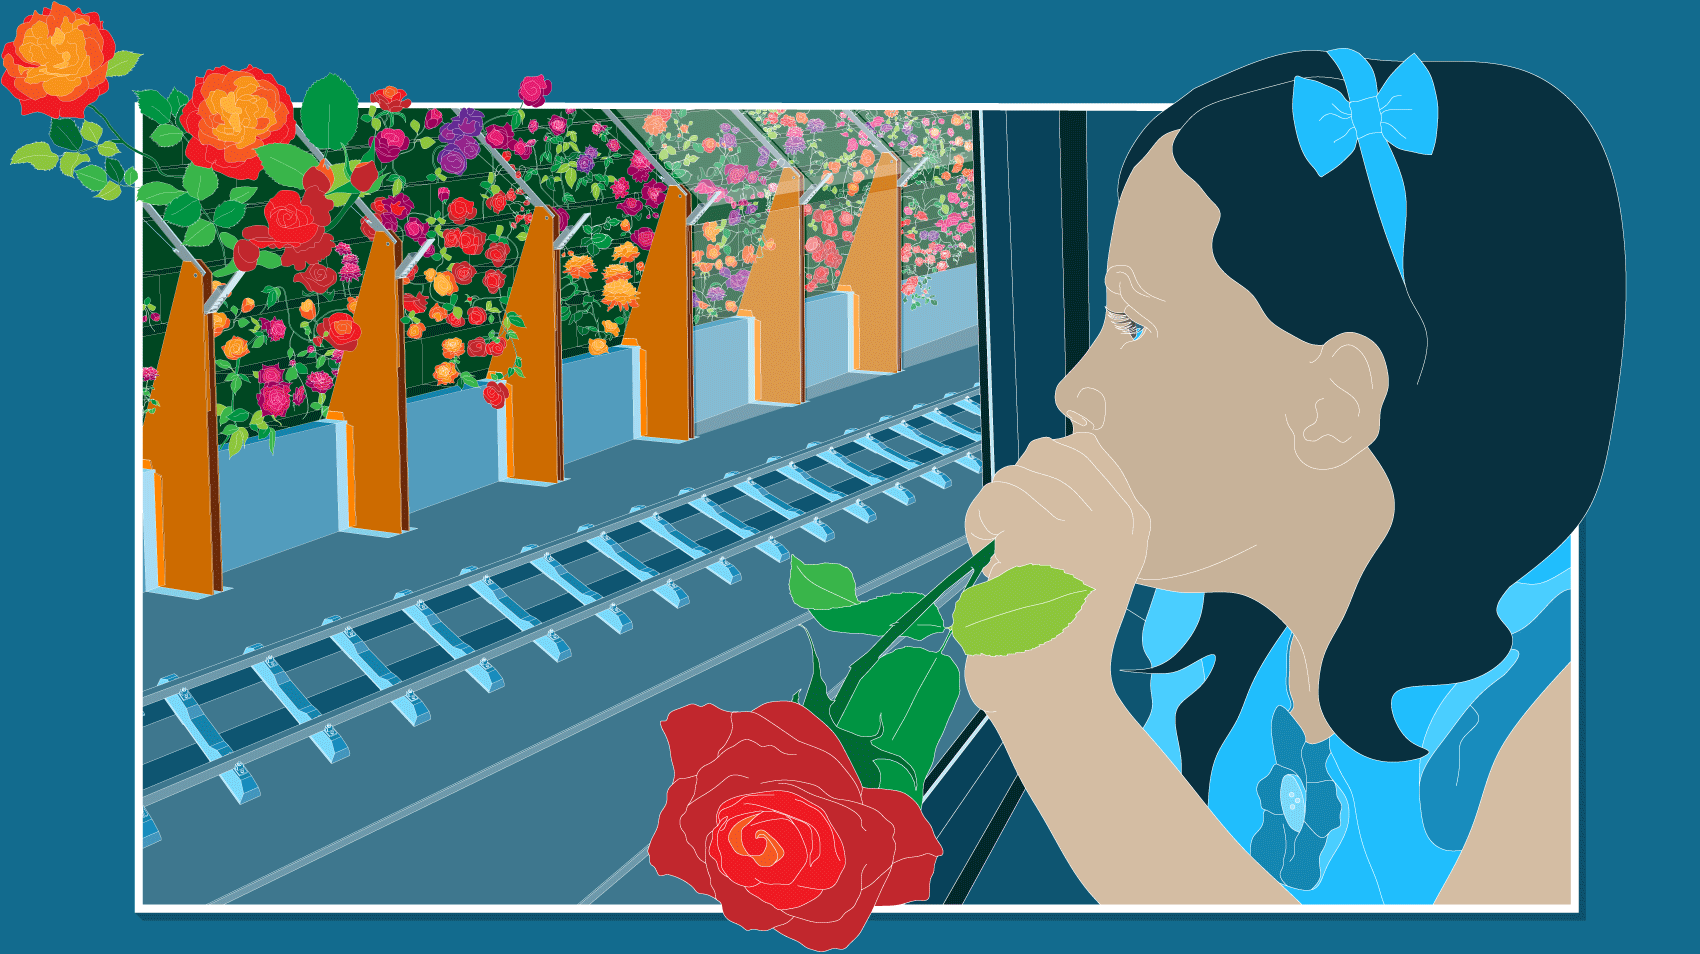 Theo Jones architecture Crystal Palace Park Rosarium view from a train drawing illustration a rose leaves the rosarium